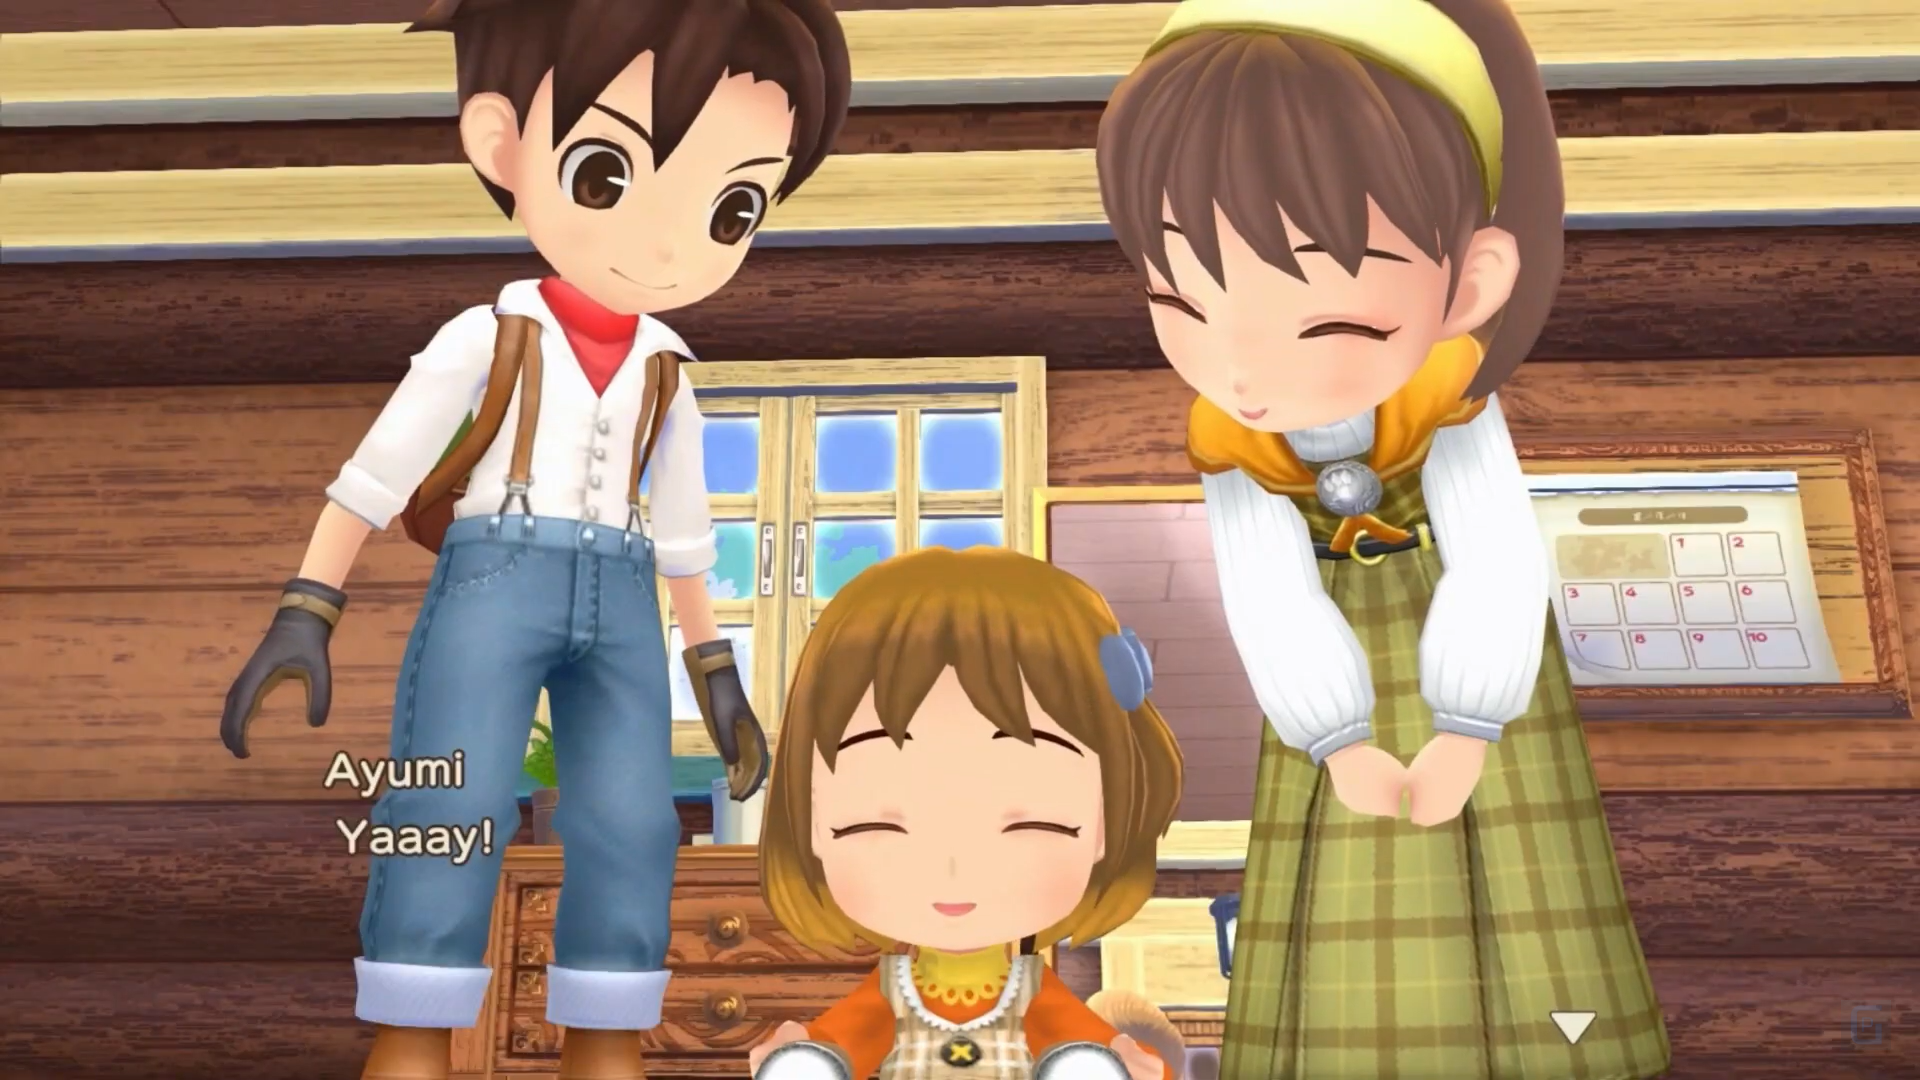 When Is Story of Seasons: A Wonderful Life Coming Out? – Answered